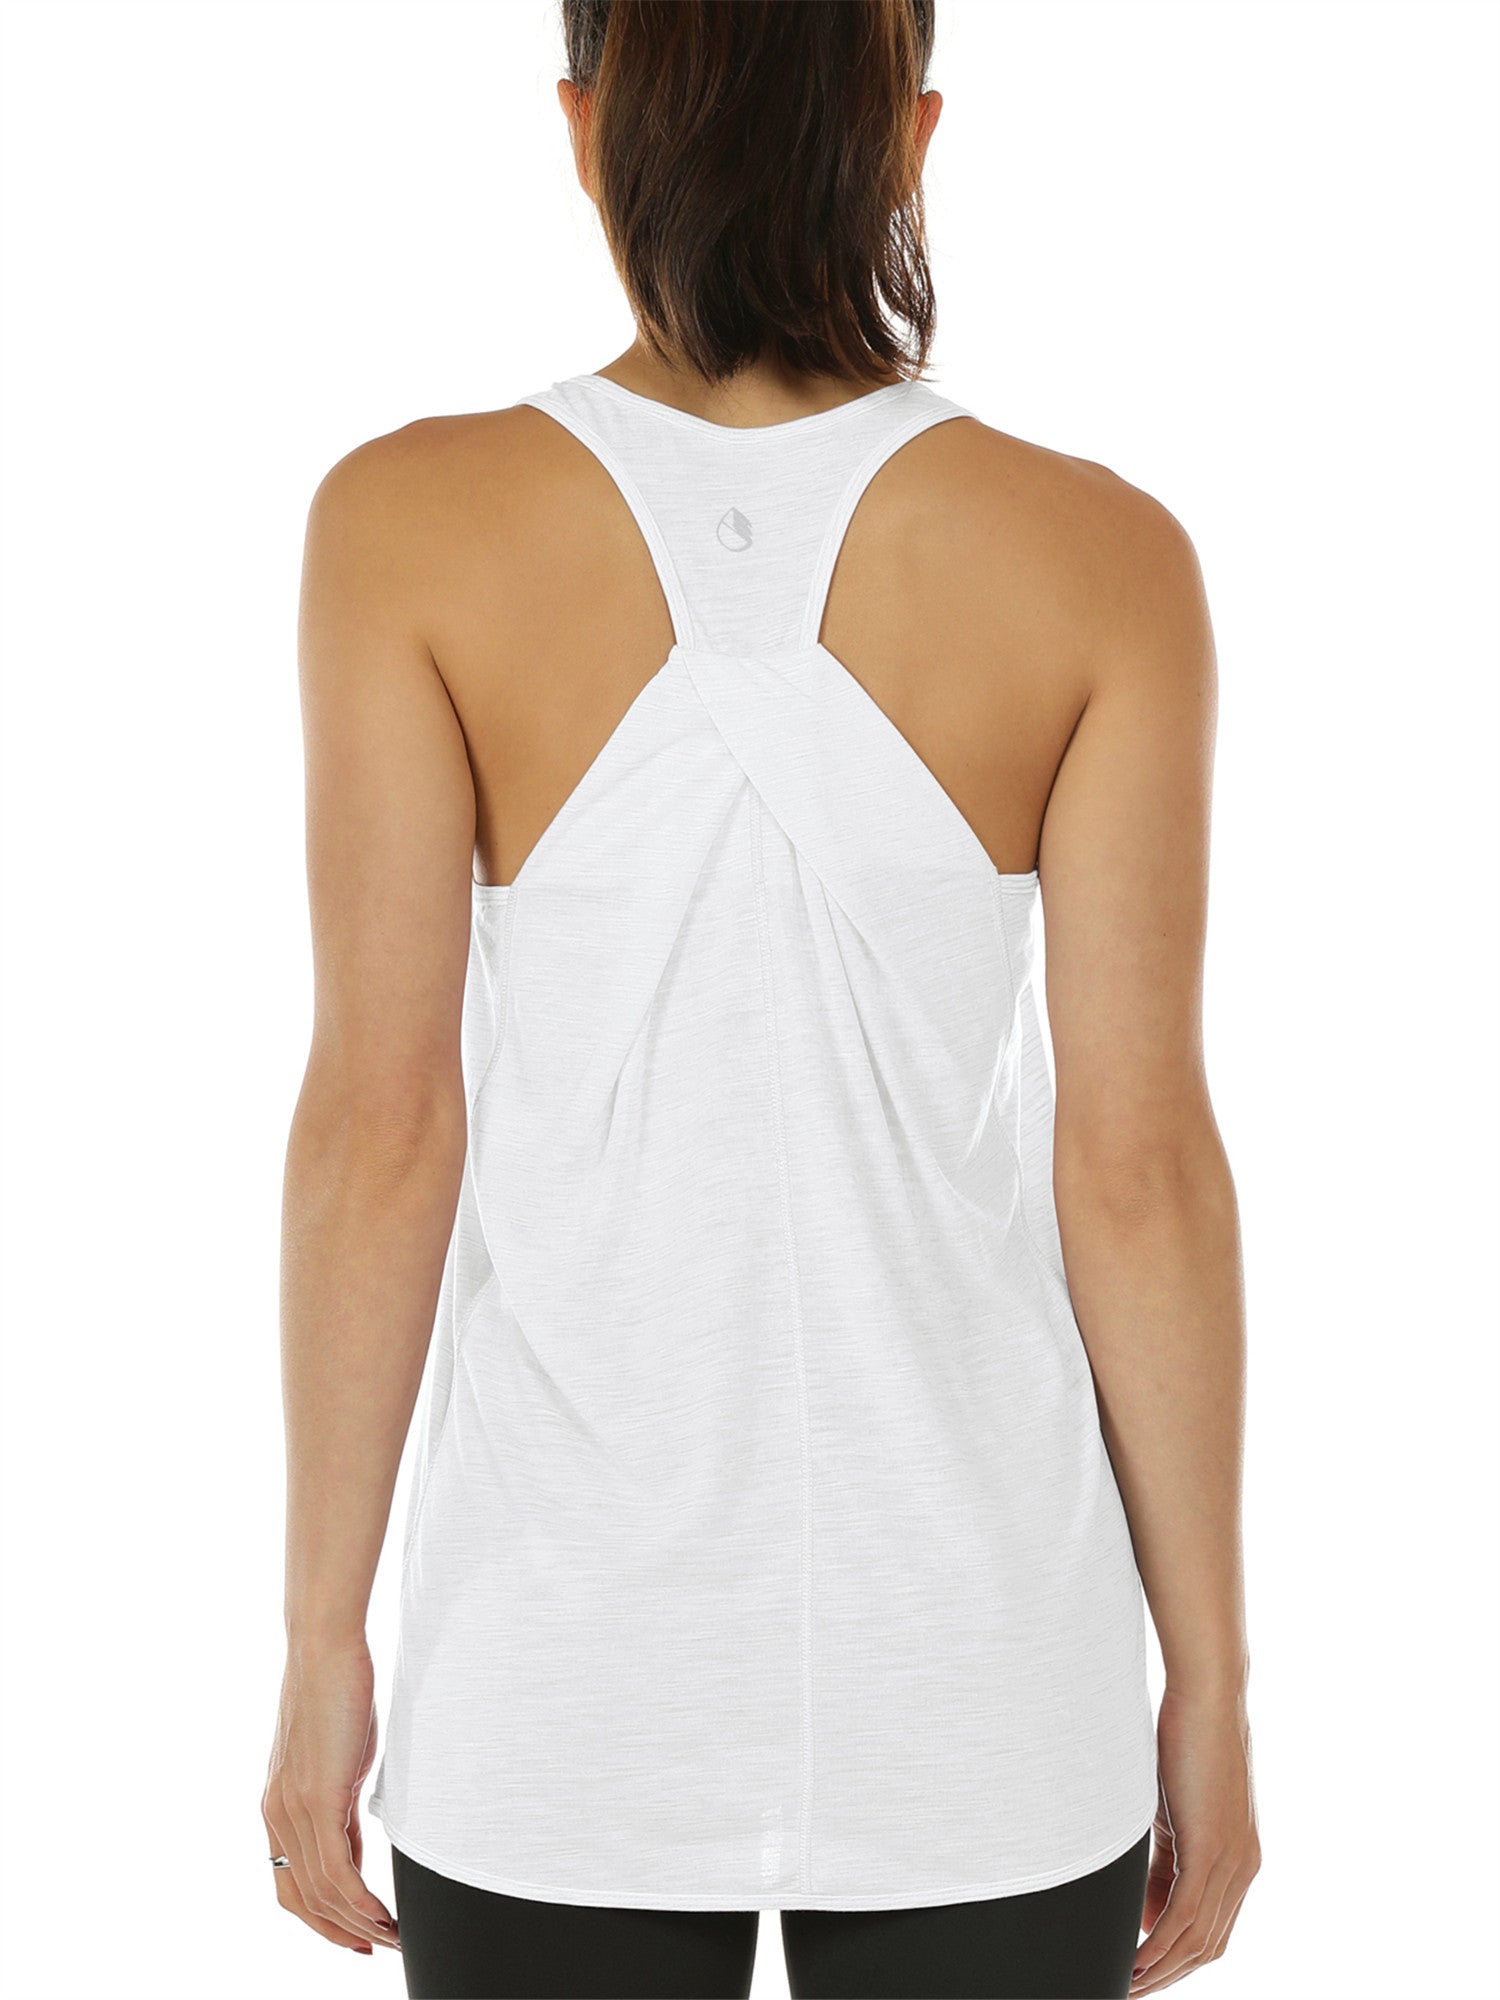 athletic muscle shirts